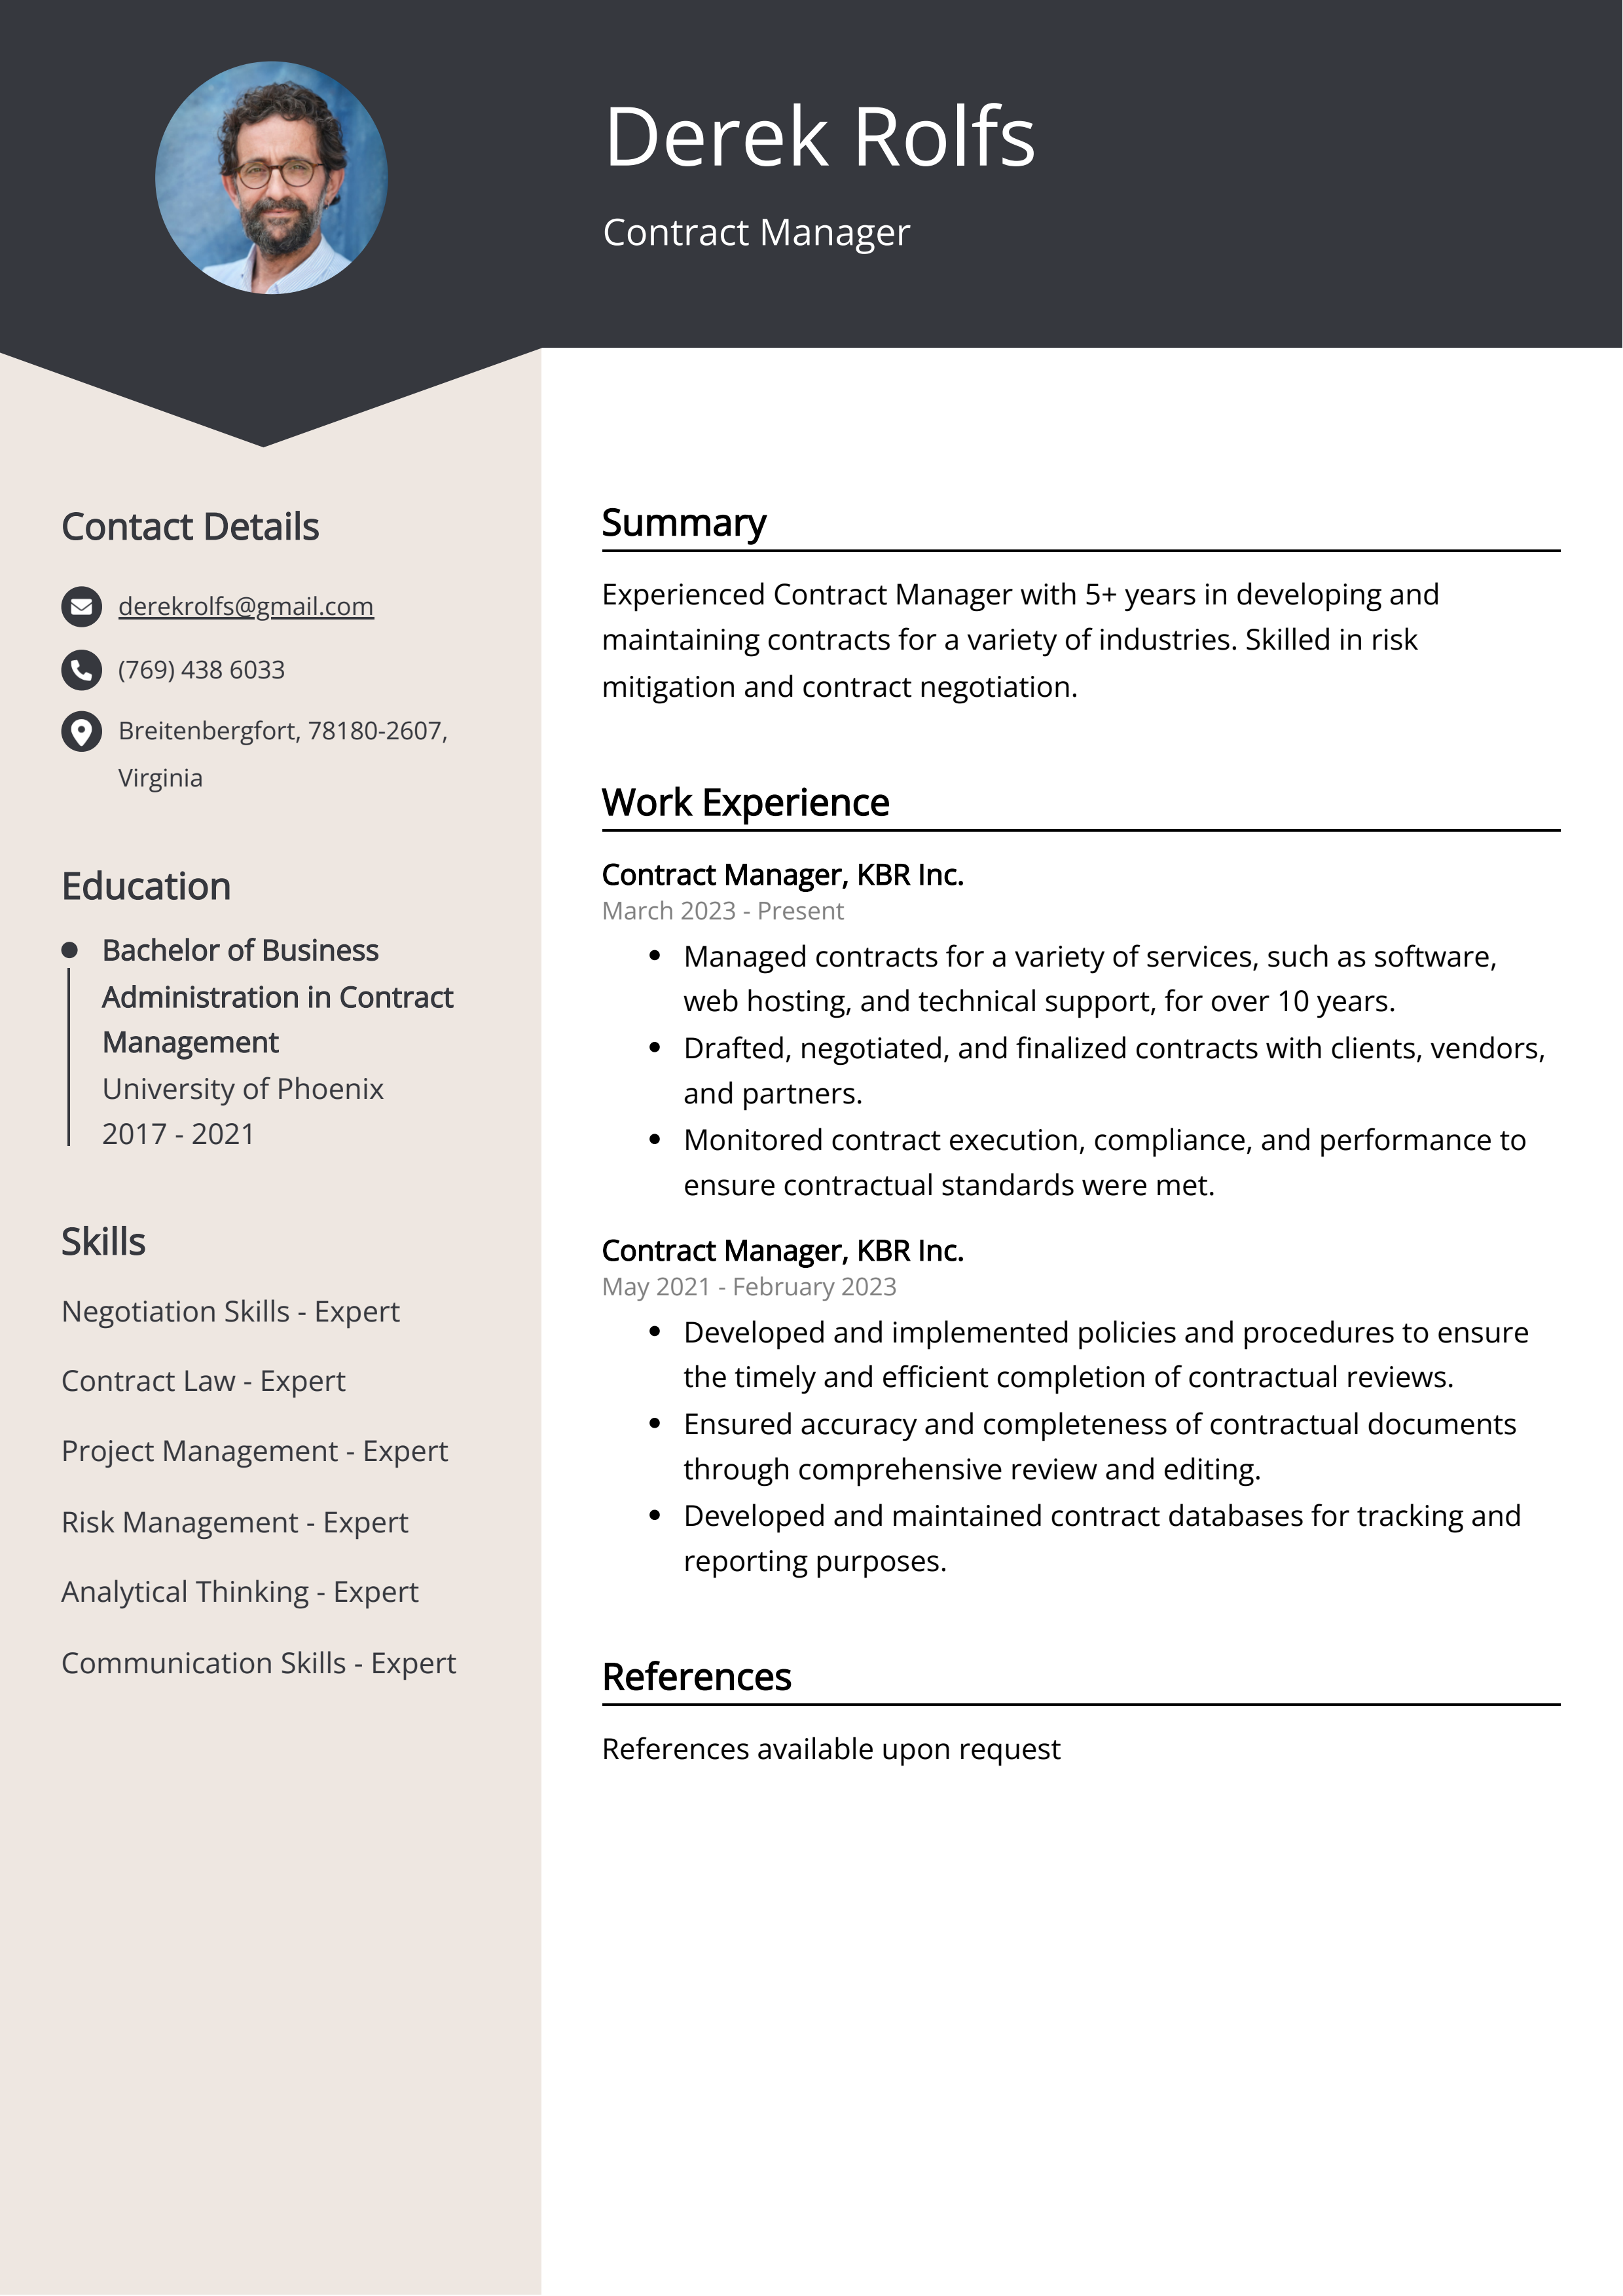 Contract Manager CV Example